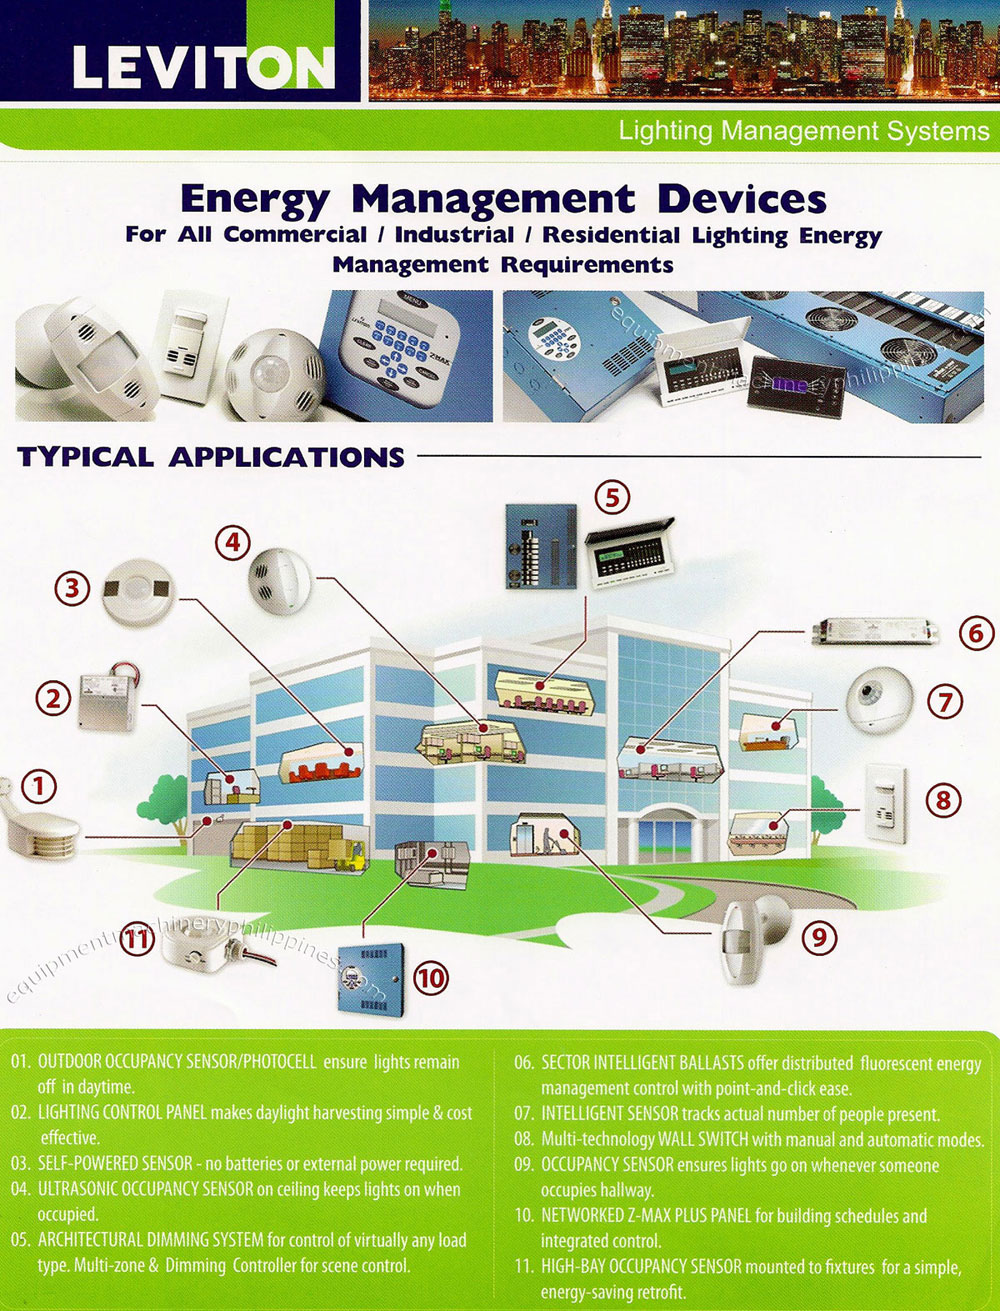 Leviton Energy Management Devices for Commercial, Industrial, Residential Lighting Management Requirement